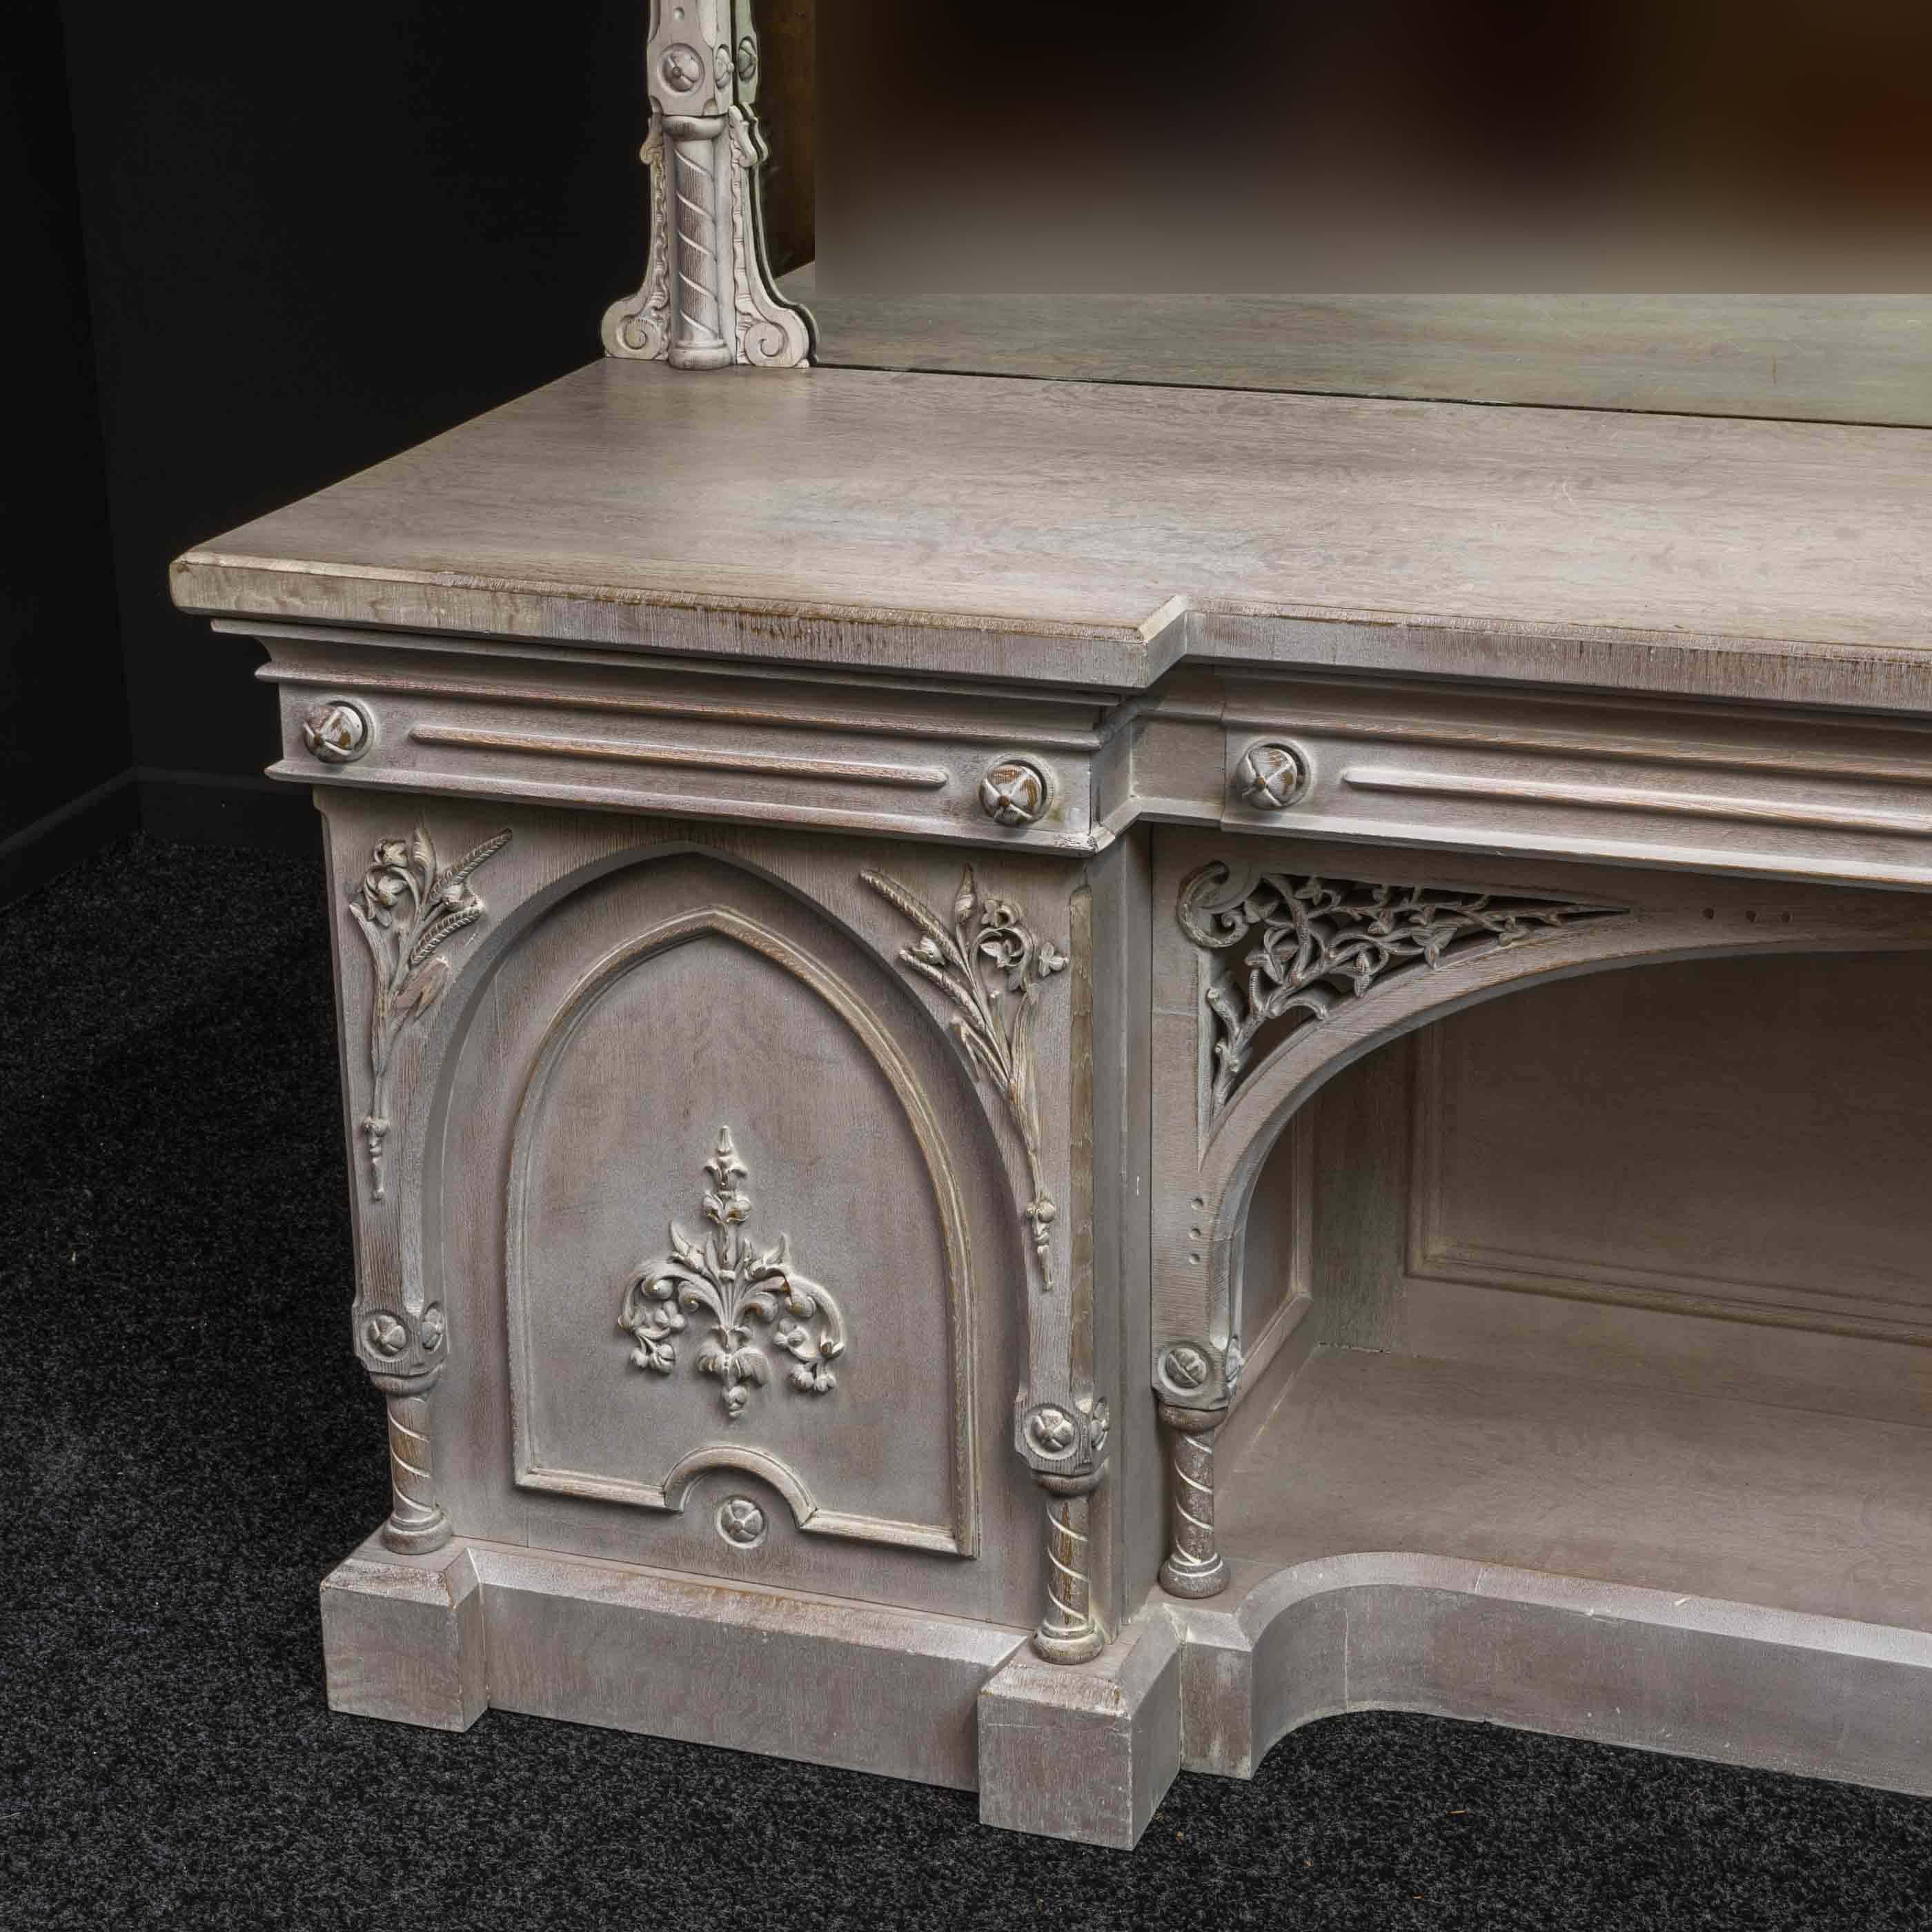 A Gothic limed oak sideboard from the Victorian period. The huge mirror has central cartouche to the frame and the original carved finials, whilst the base has beautiful Gothic arched doors with crisp carvings of foliage and ears of wheat. The